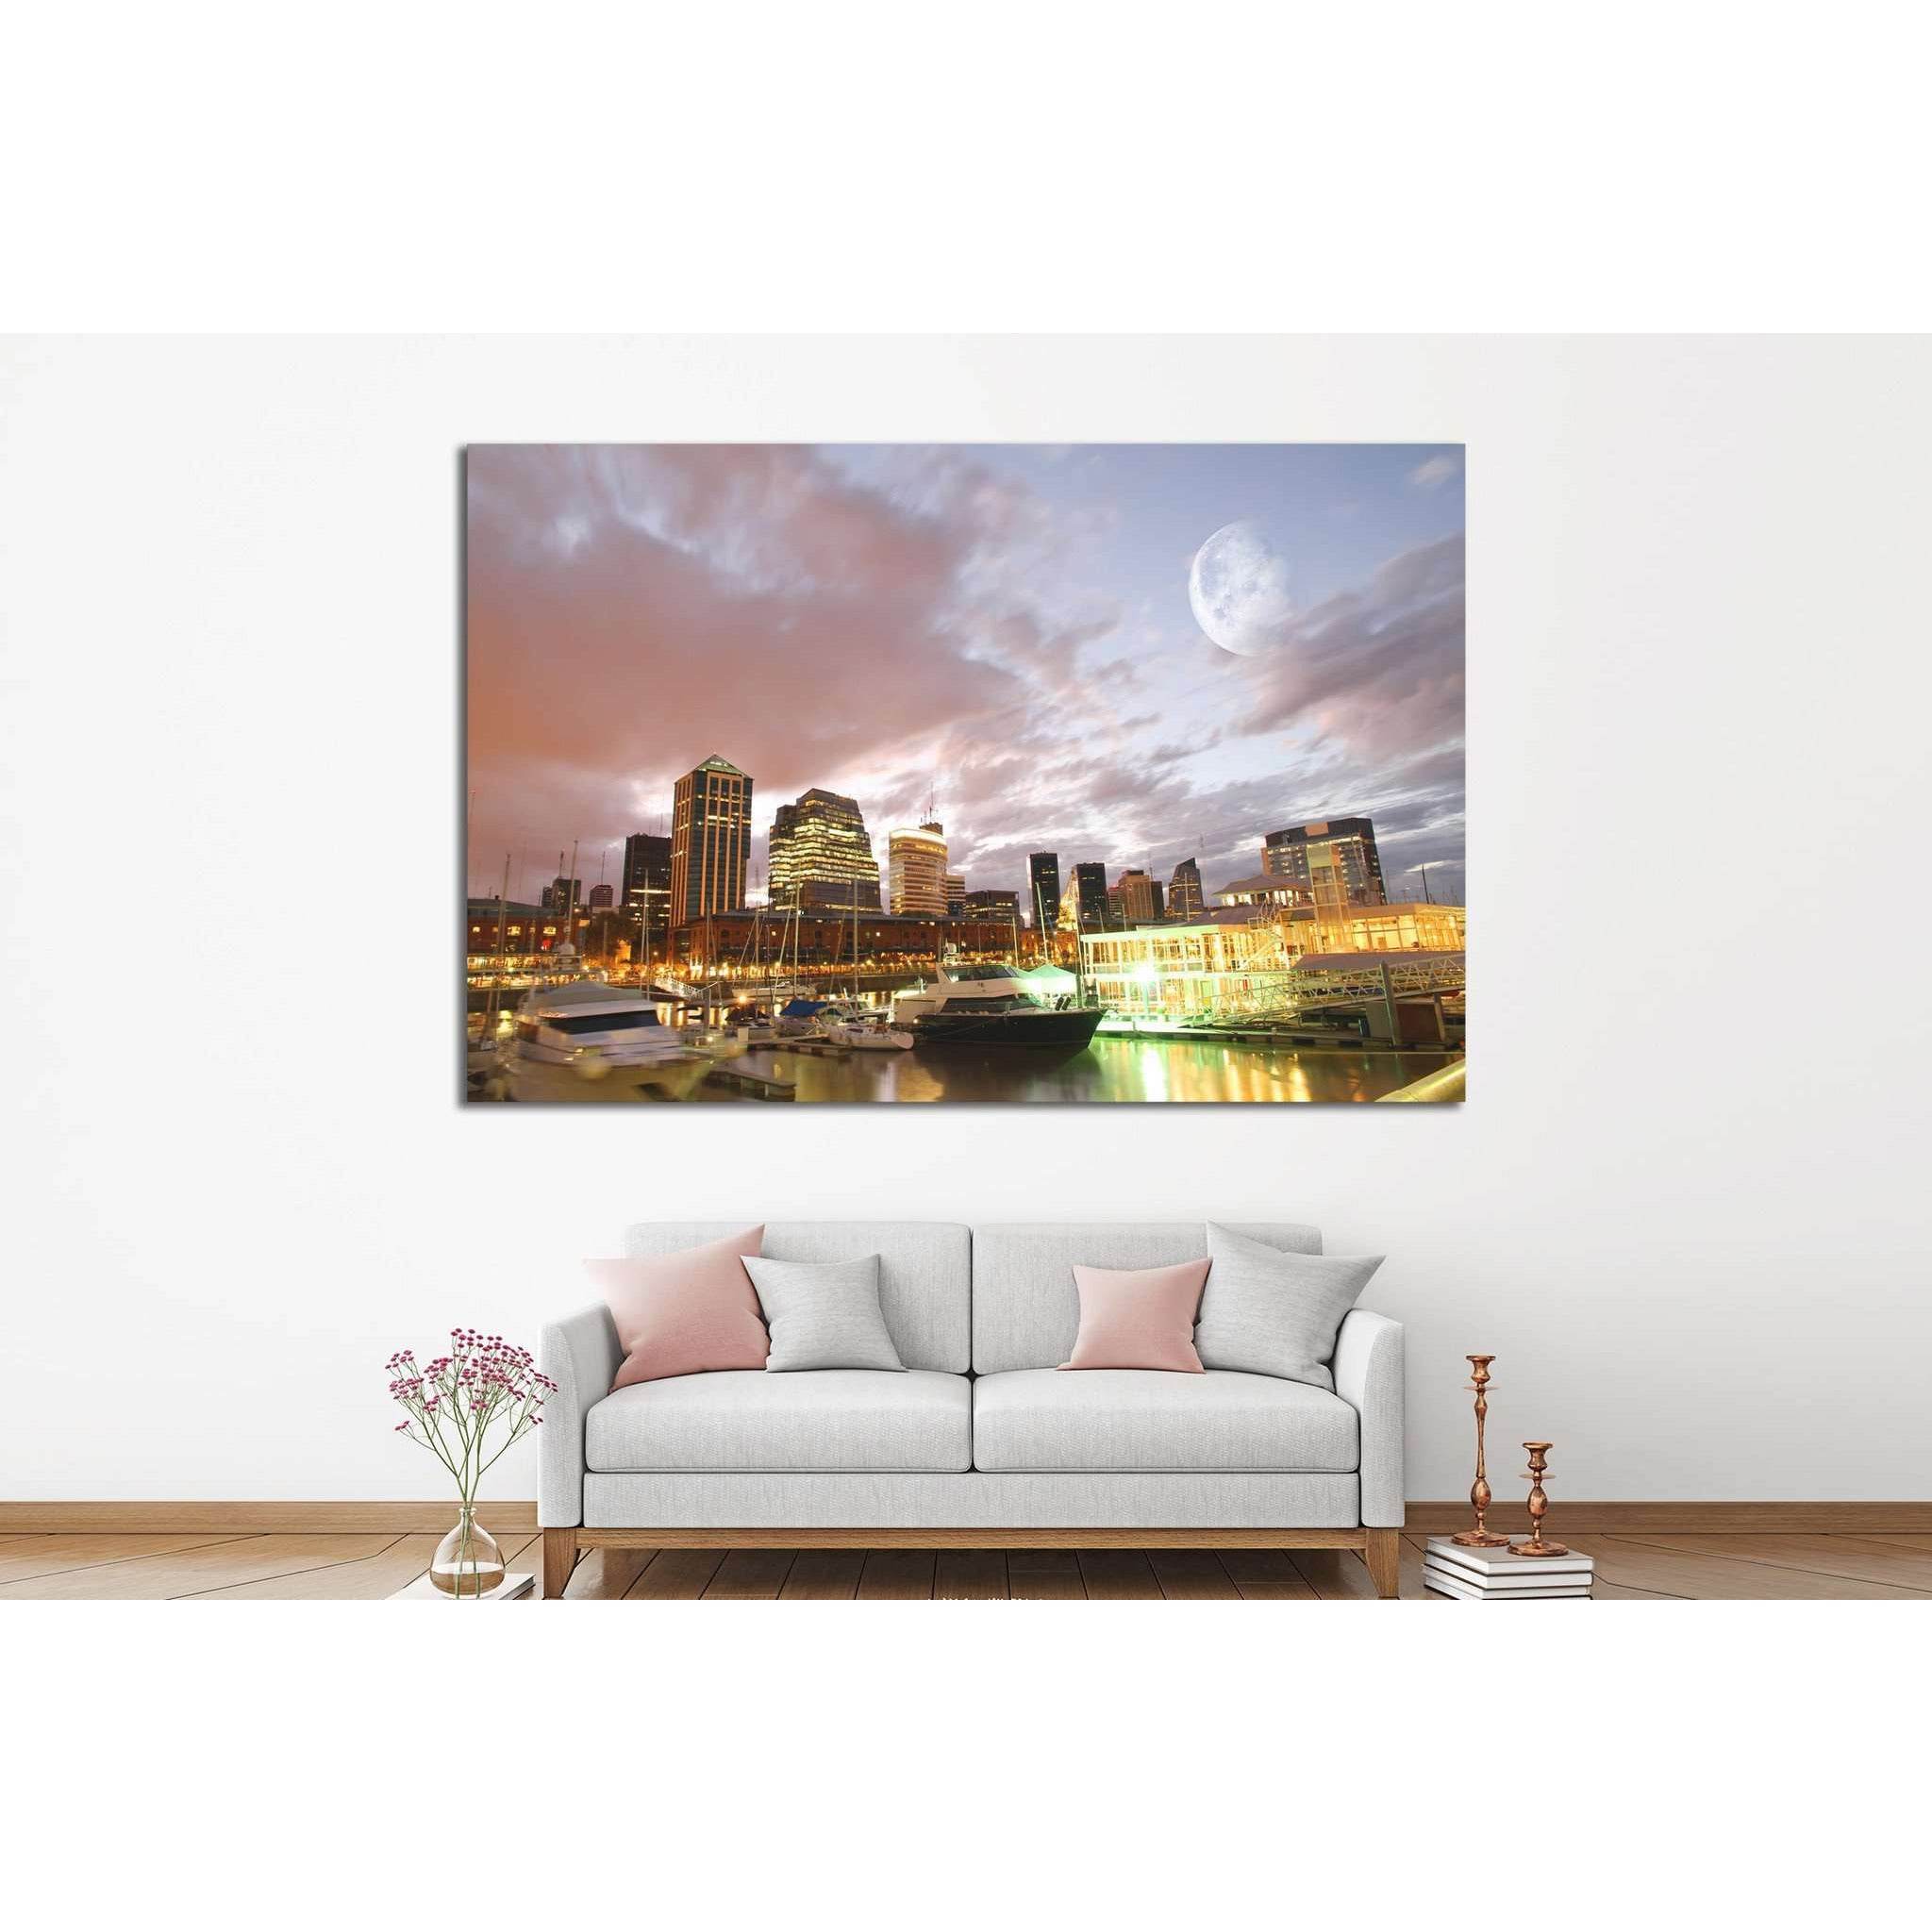 Puerto Madero in Buenos Aires, Argentina №1139 Ready to Hang Canvas Print